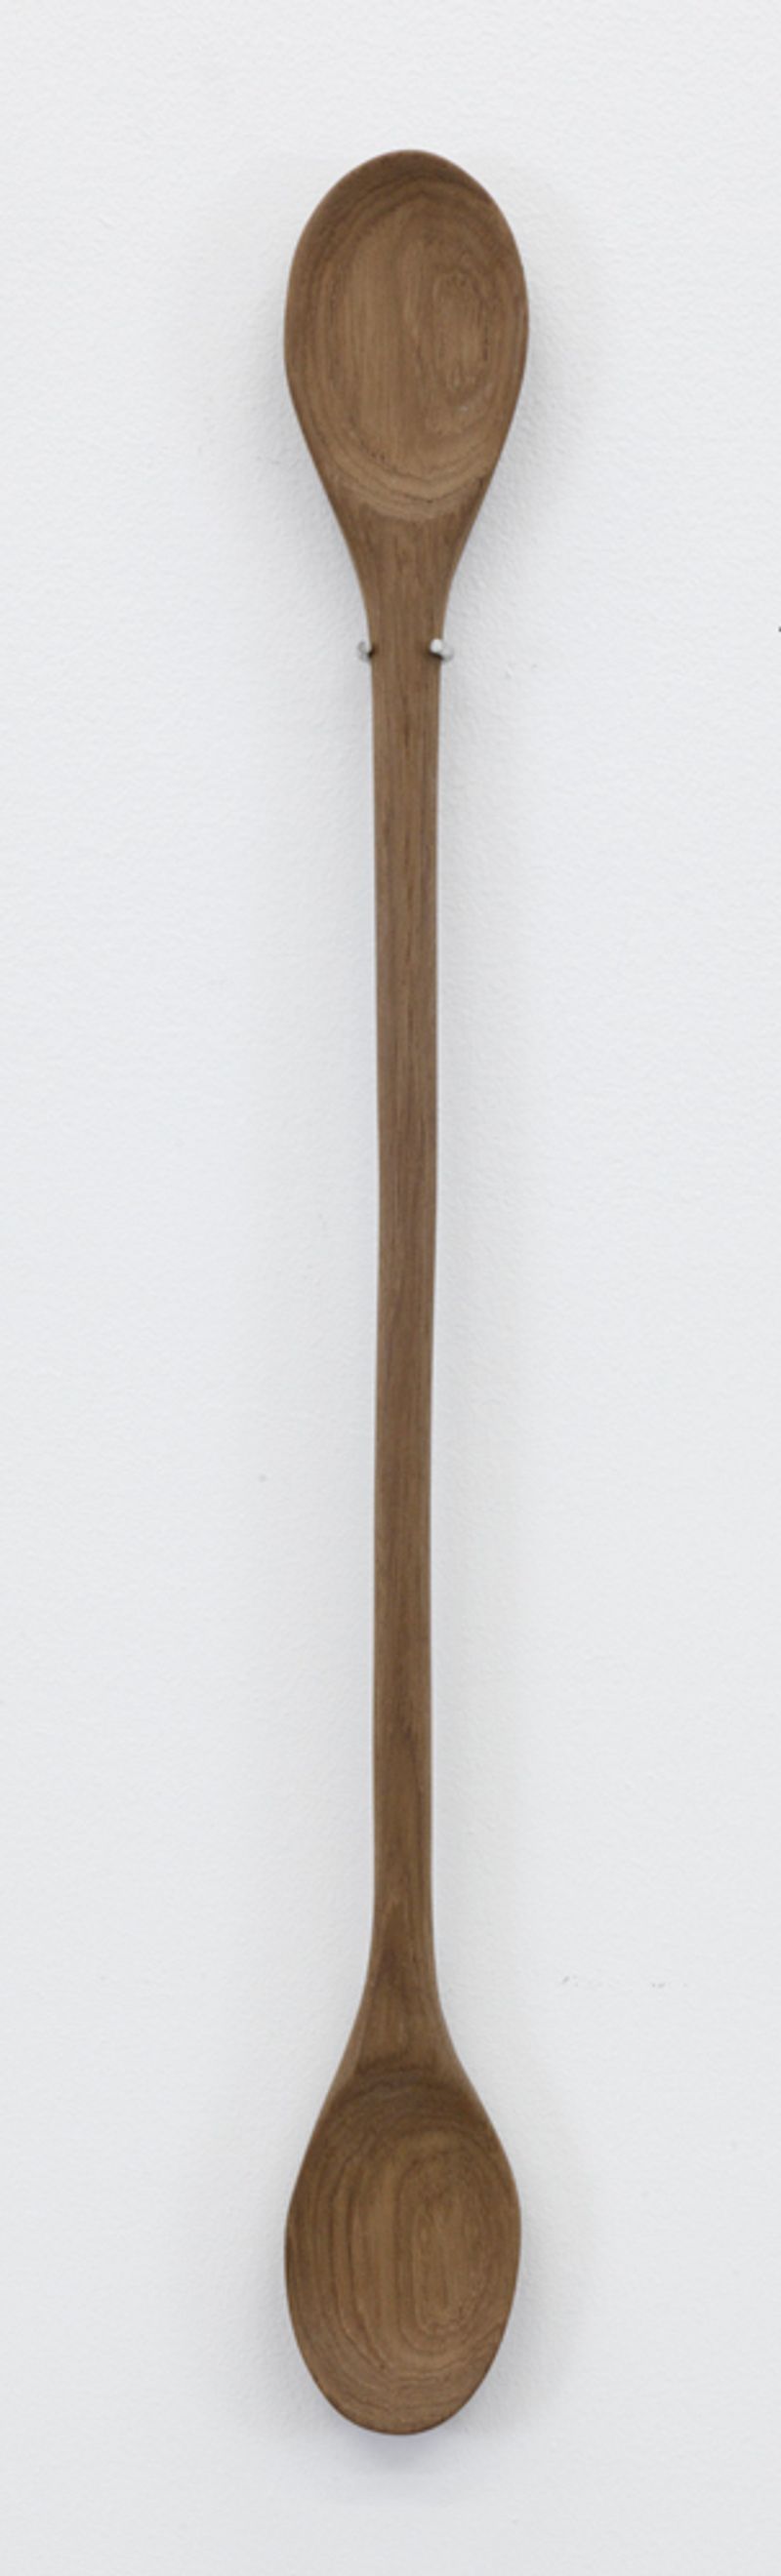 Installation view of displayed artwork titled Doublespoon, Teak